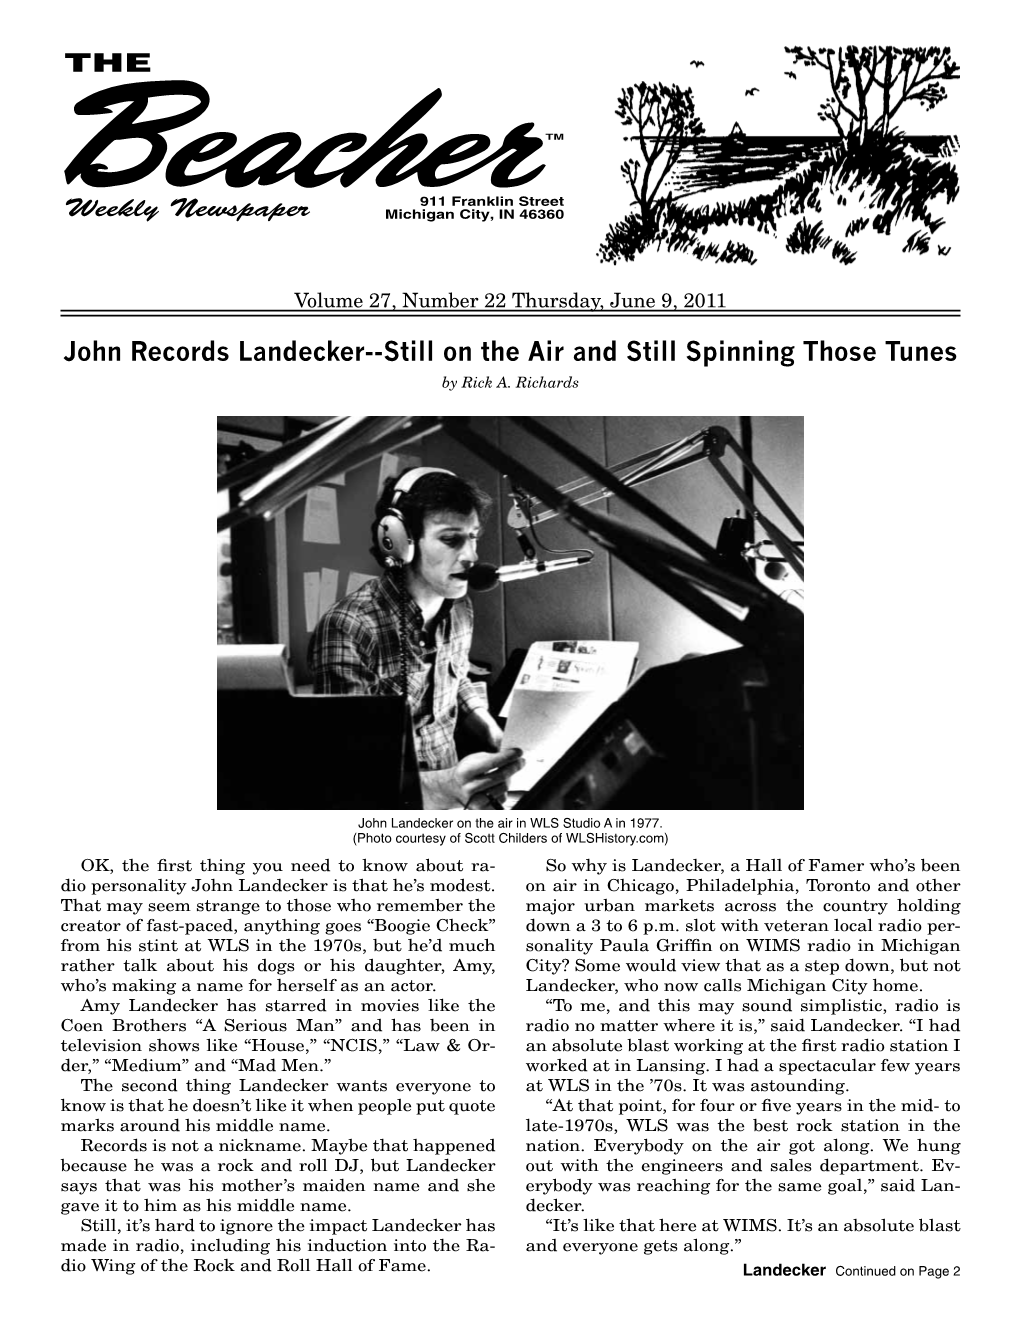 John Records Landecker--Still on the Air and Still Spinning Those Tunes by Rick A